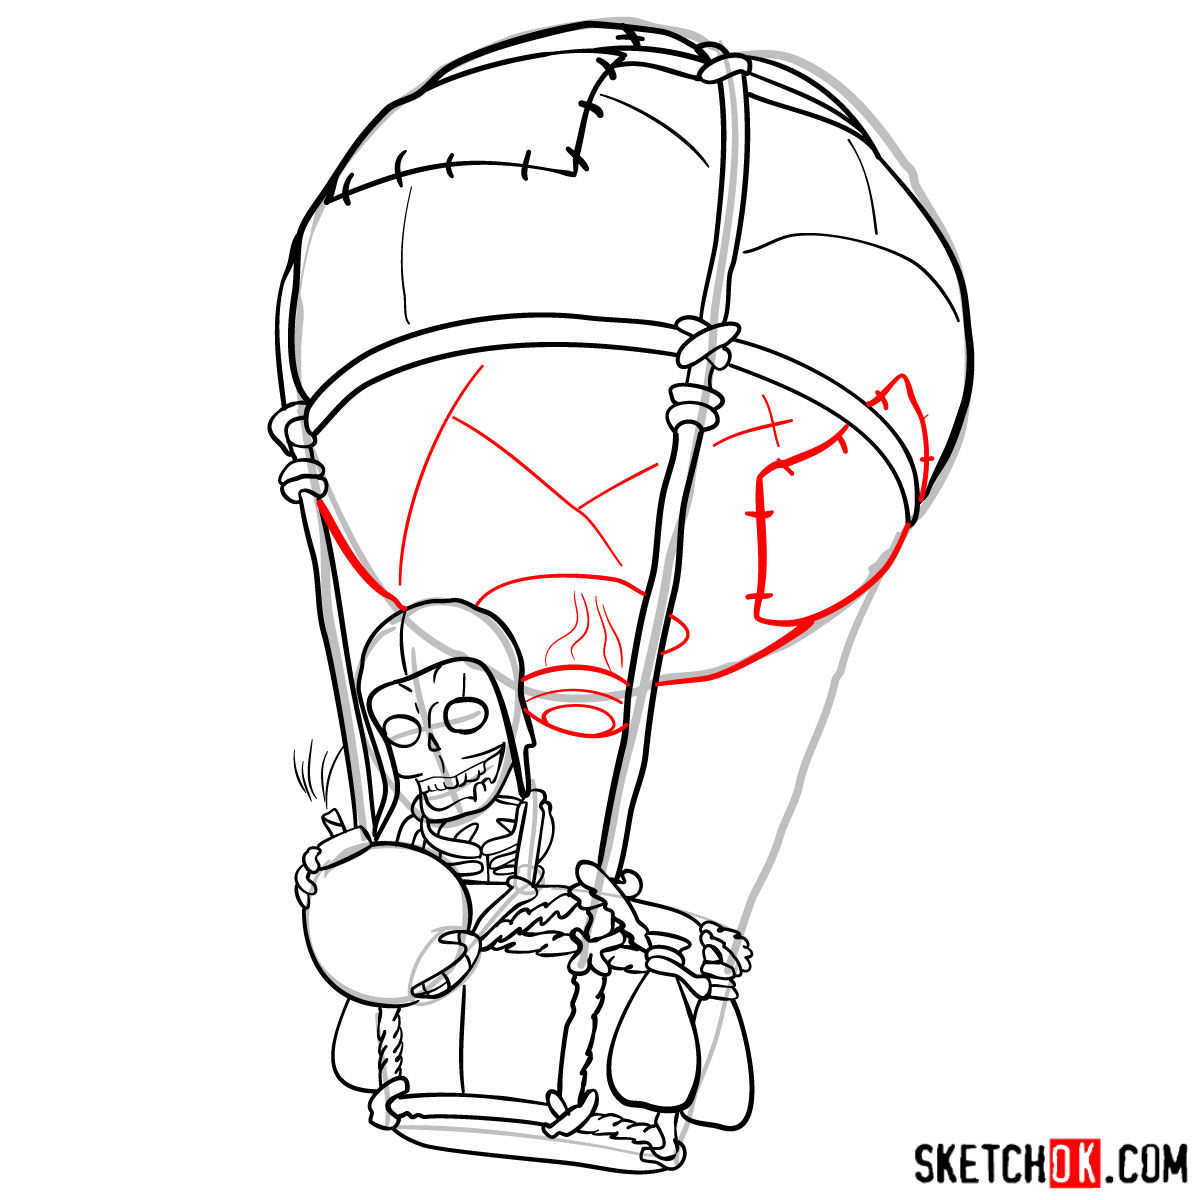 How to draw Balloon with a skeleton - step 11